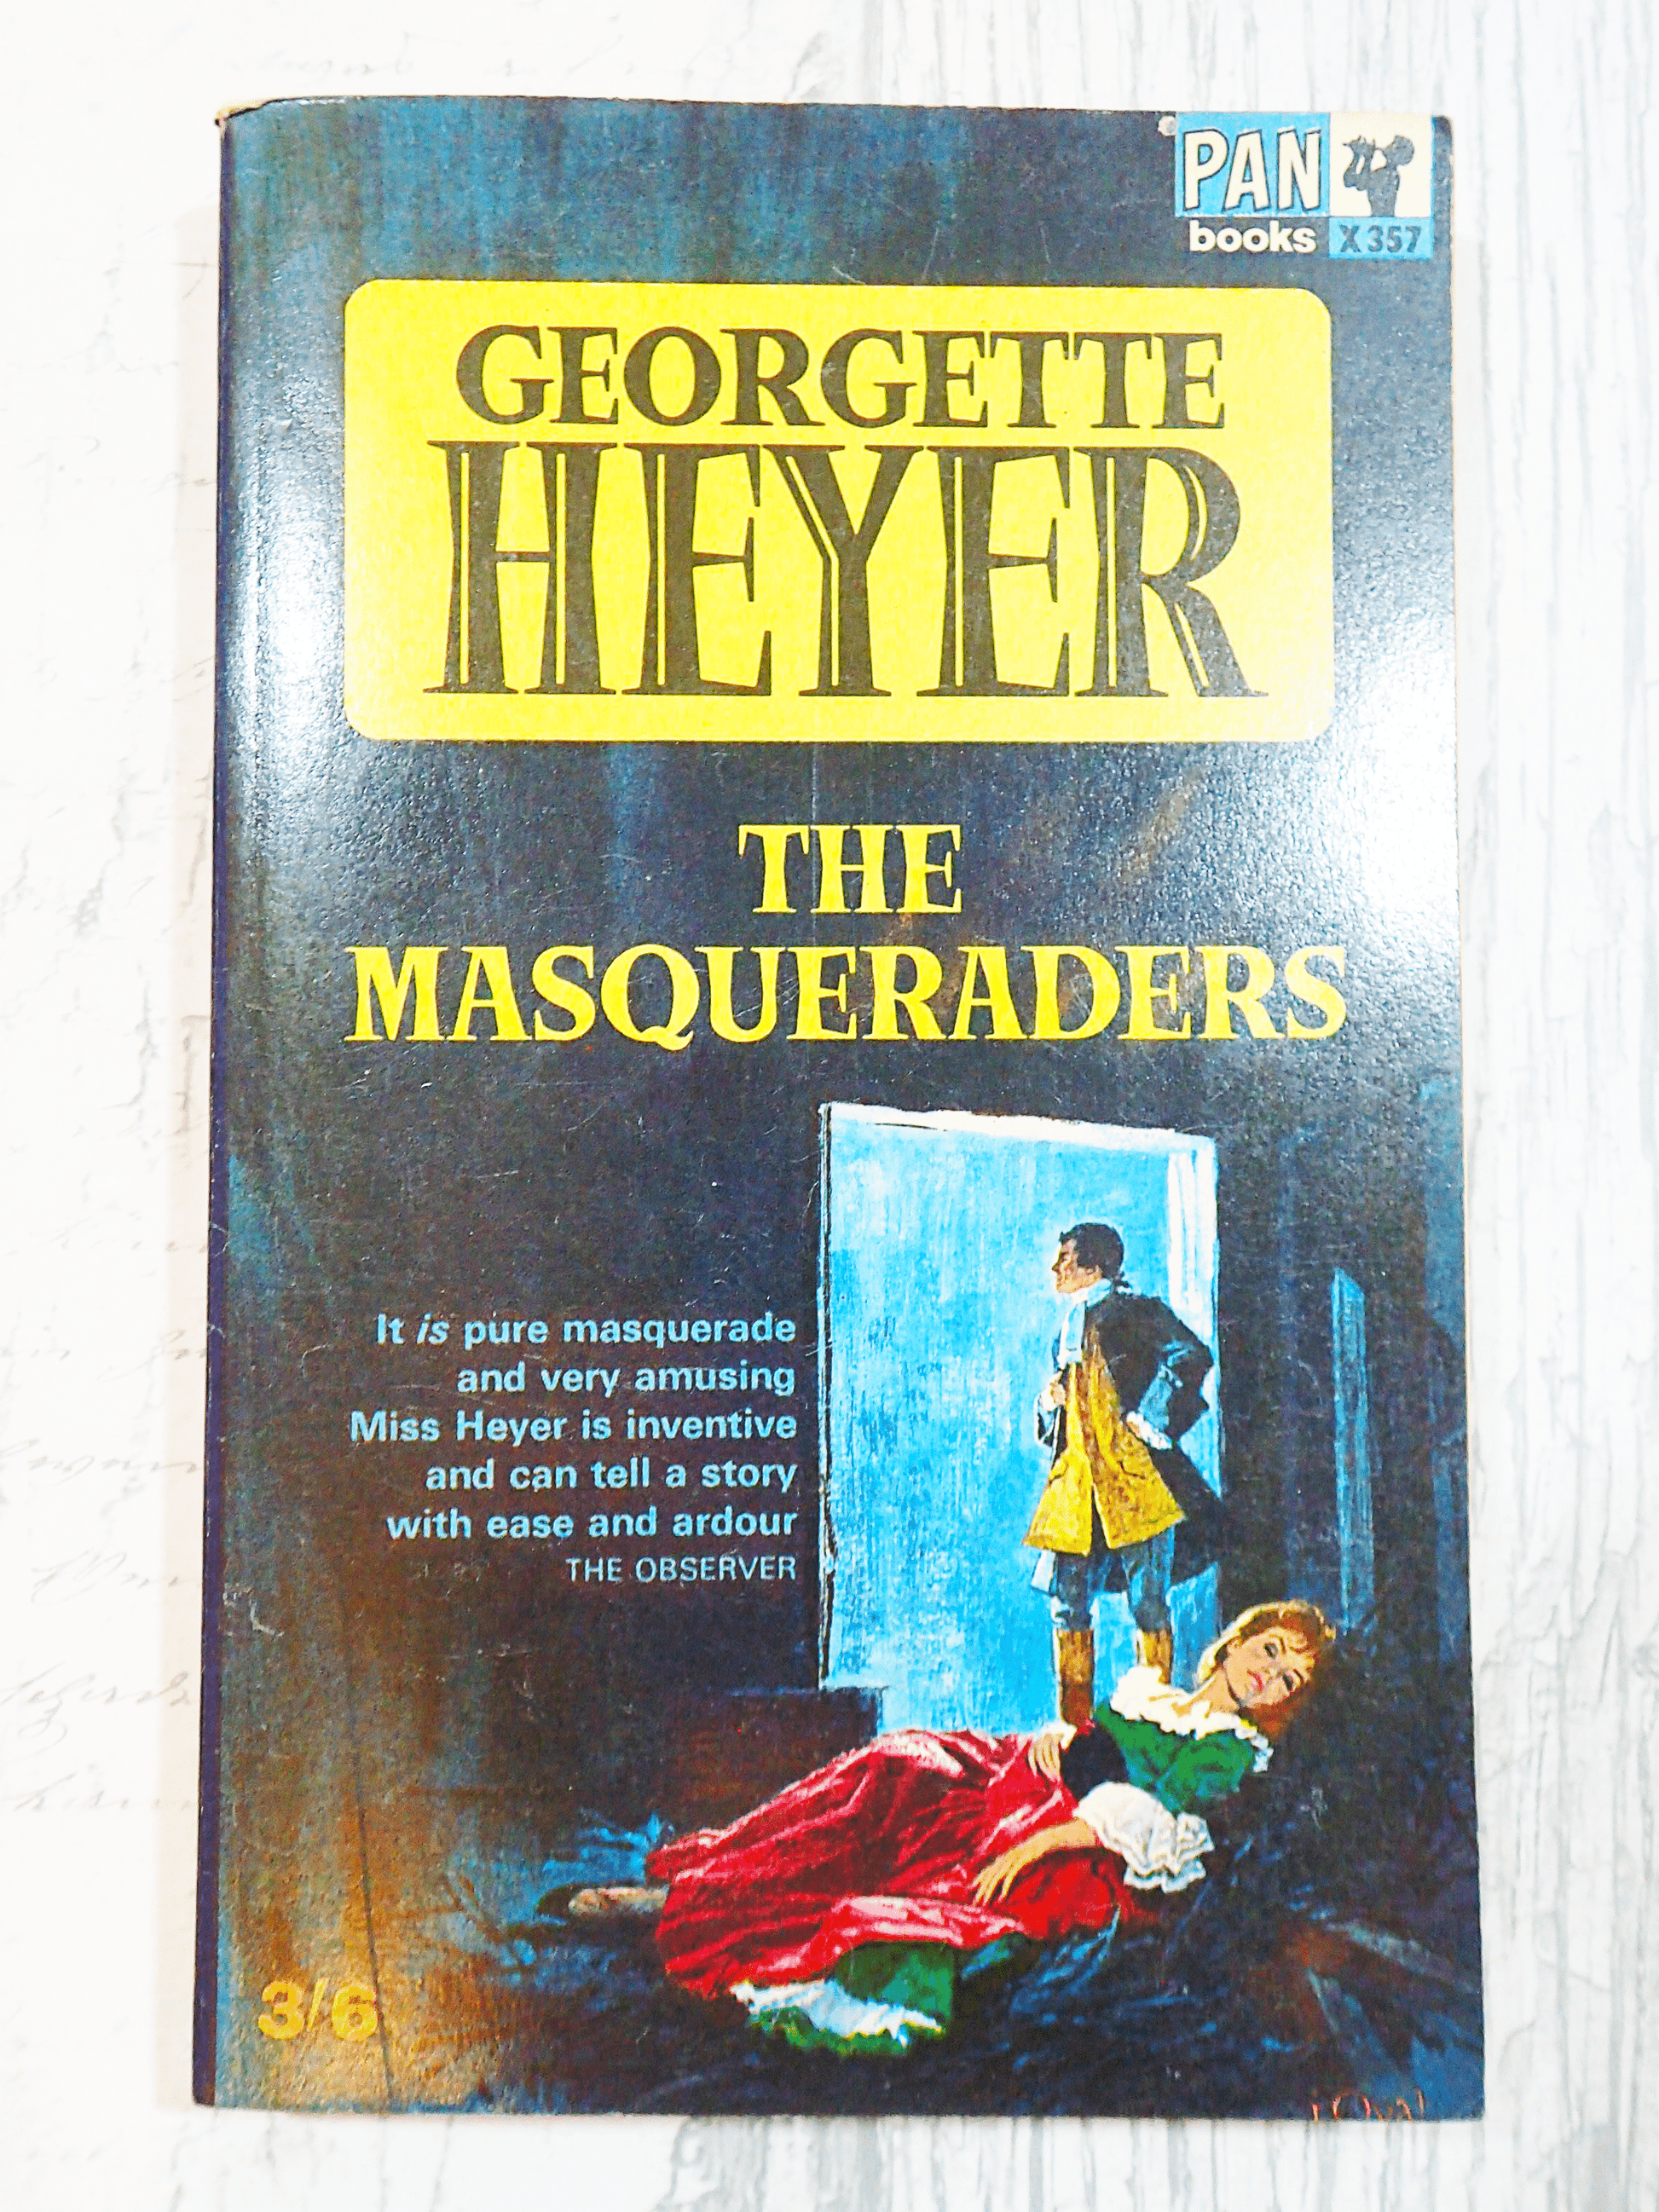 Front cover of vintage Pan paperback book, 'The Masqueraders', by Georgette Heyer showing a man and woman in Georgian costume and the book titles in yellow and black against a light background.